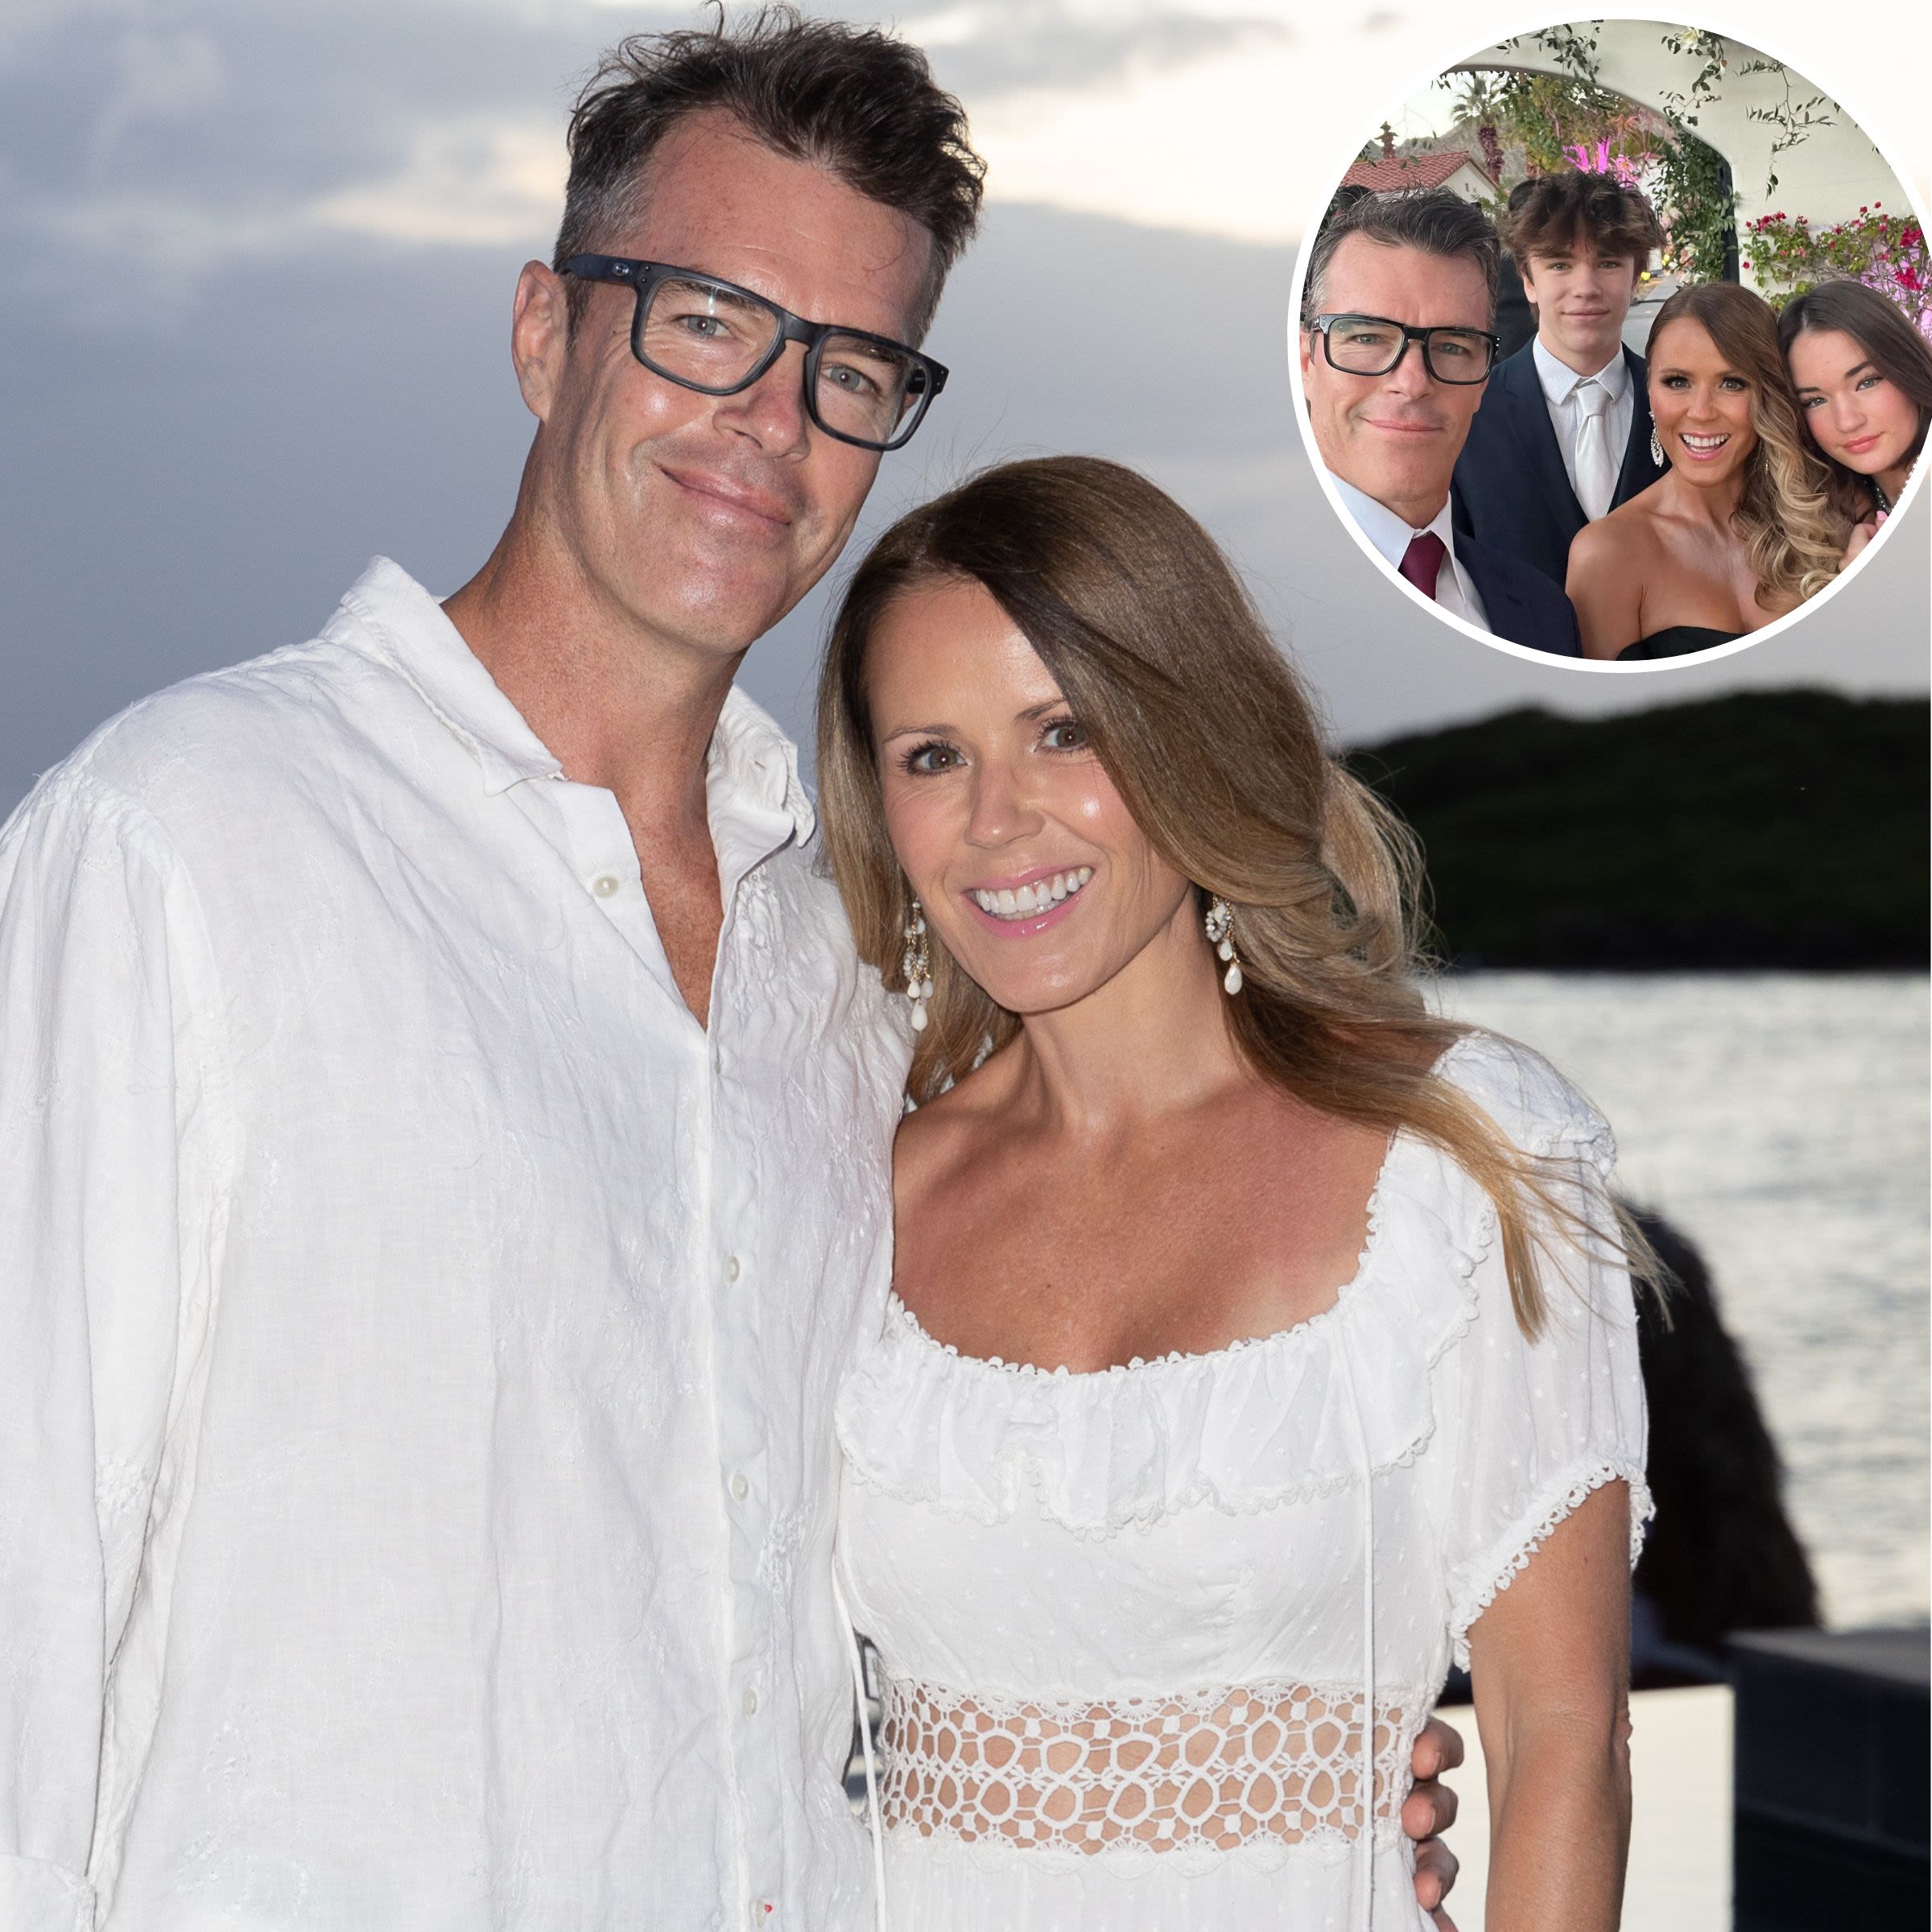 Bachelorette’s Trista and Ryan Sutter’s 2 Kids Were the 1st Bachelor Nation Babies! Meet Them